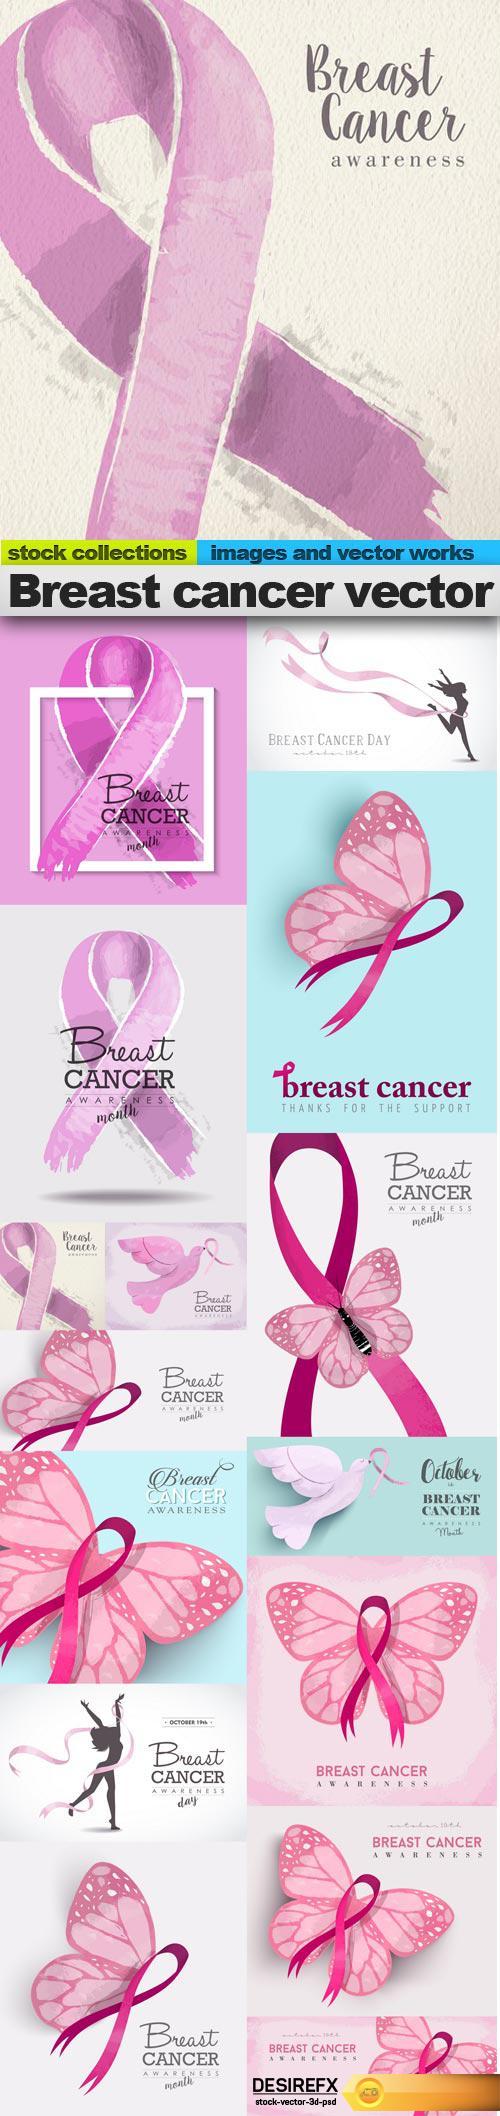 Breast cancer vector, 15 x EPS